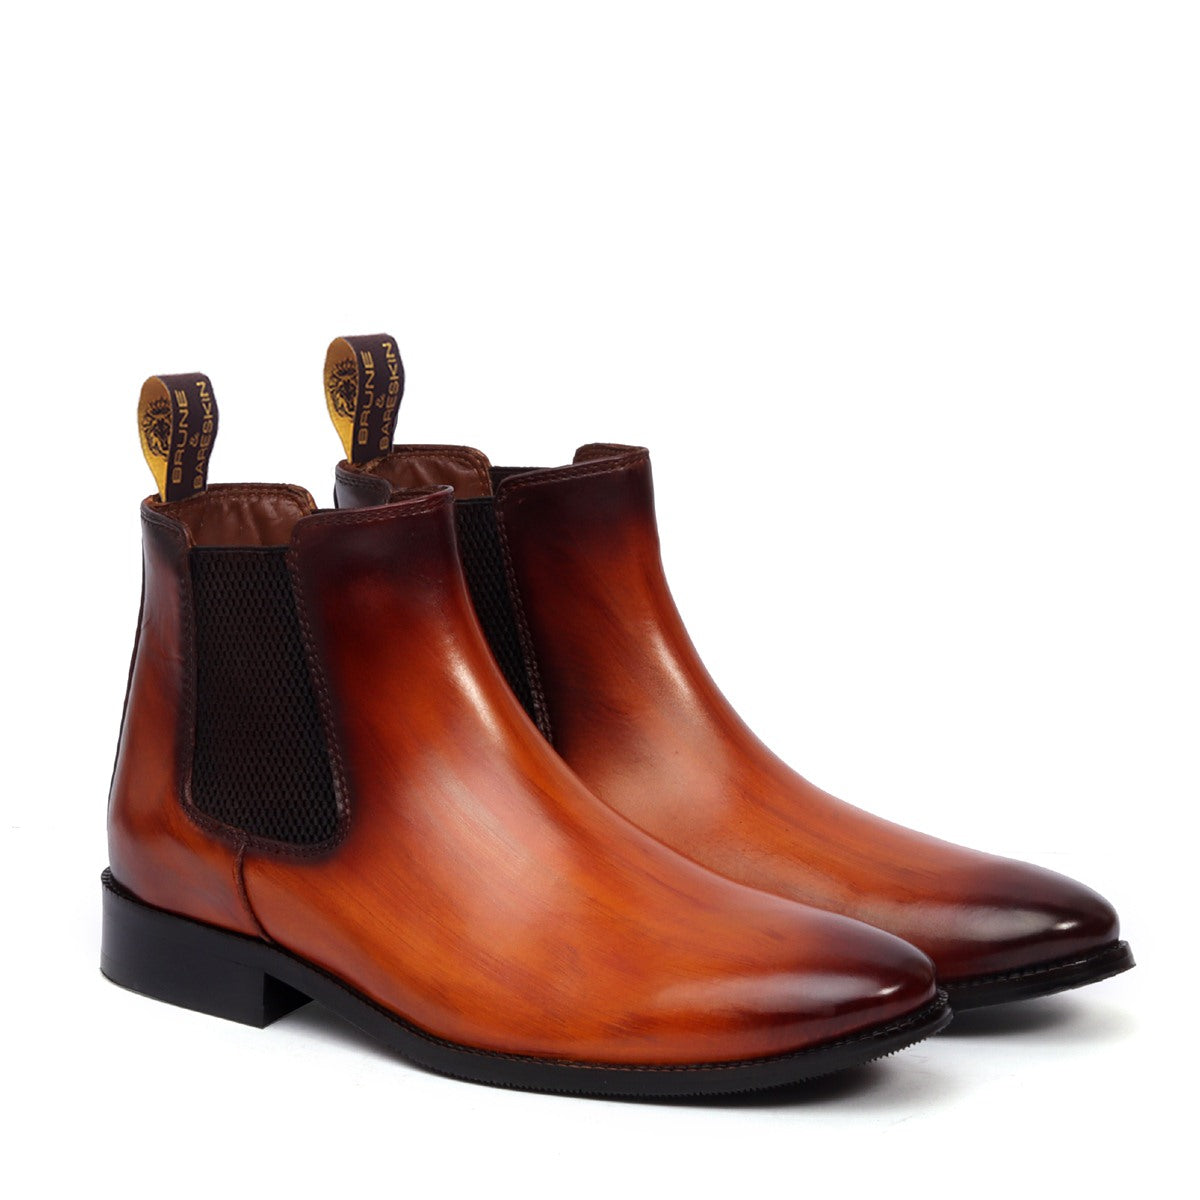 Tan Leather Hand Made Chelsea Boots For Men By Brune & Bareskin